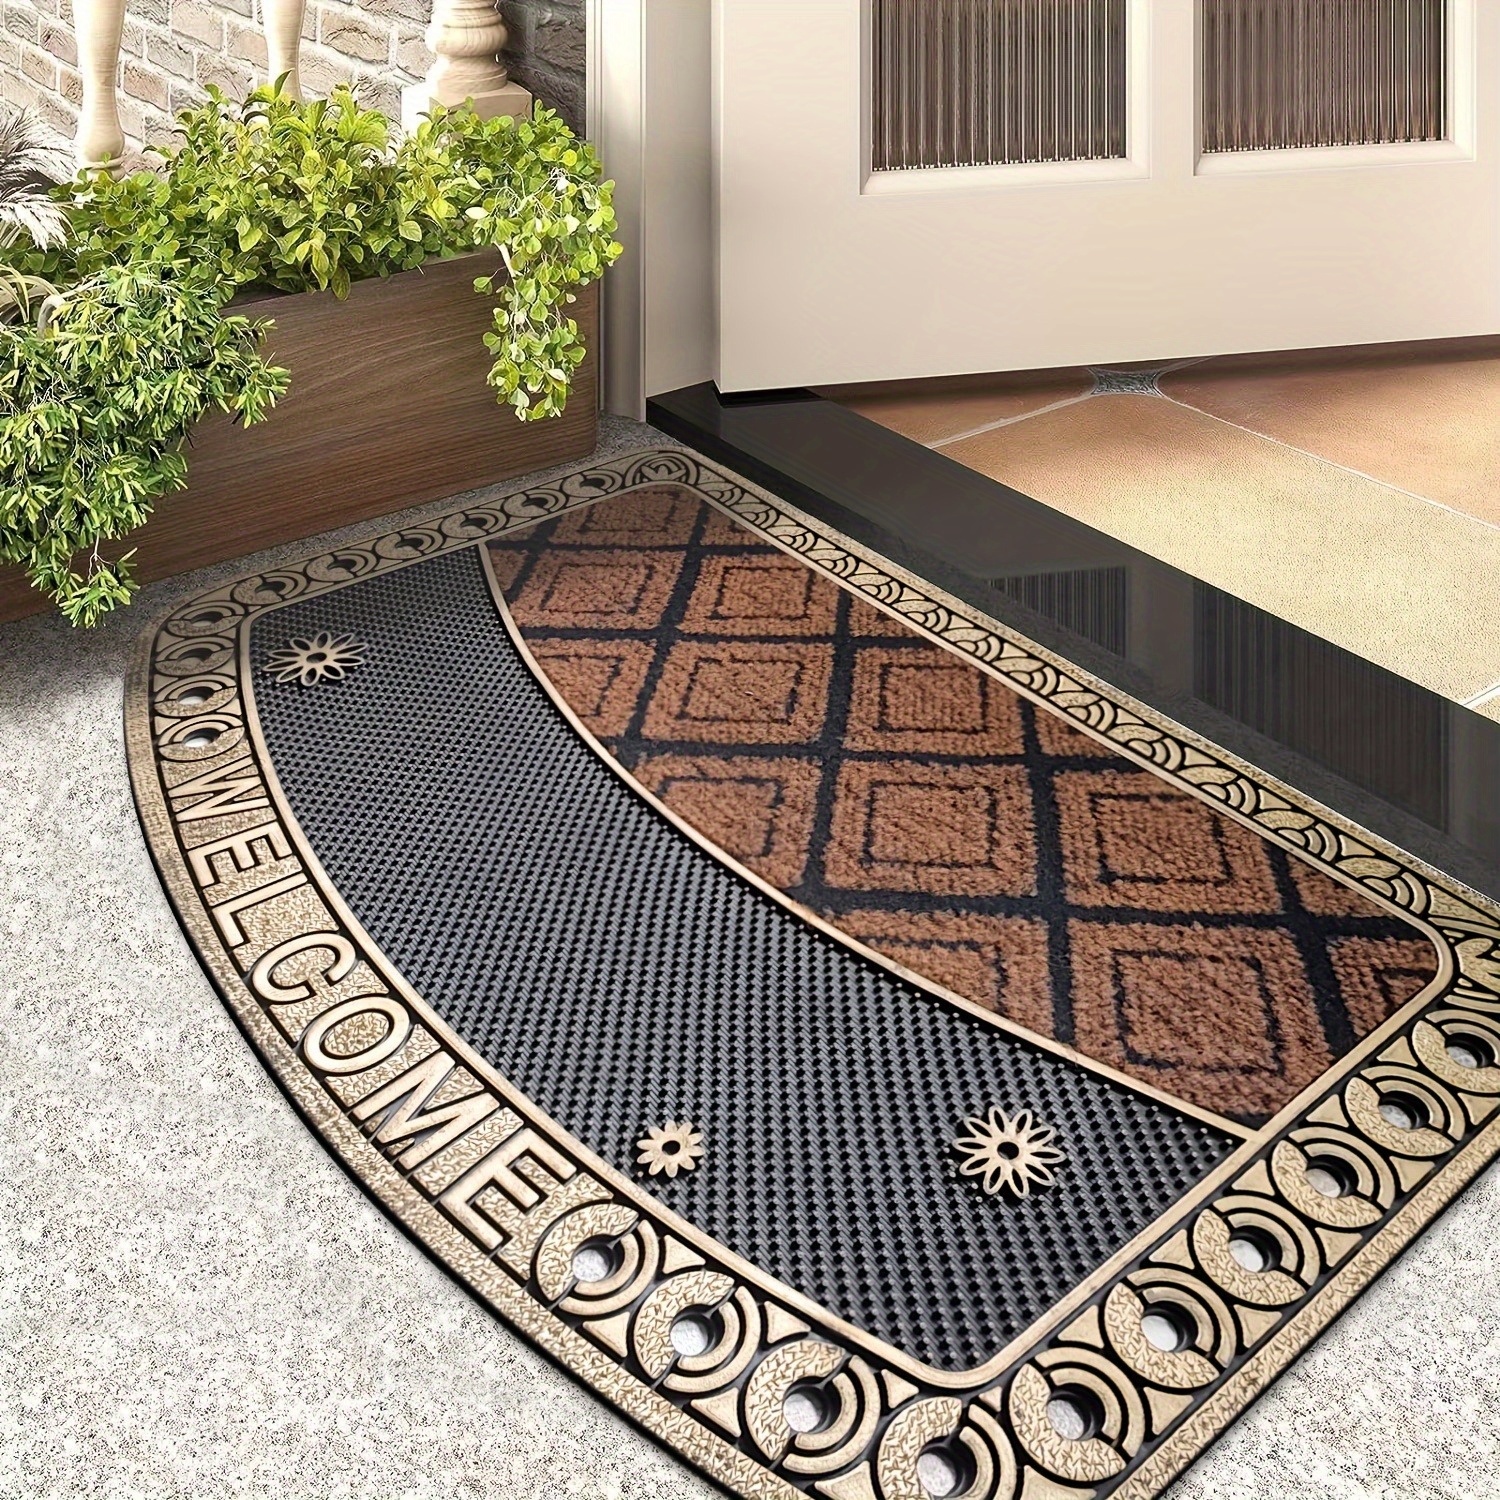 

1pc, Elegant Luxurious Motif Doormat - Anti-skid, Absorbent & Hand-washable - Perfect For Home Decor, Indoor/outdoor Use